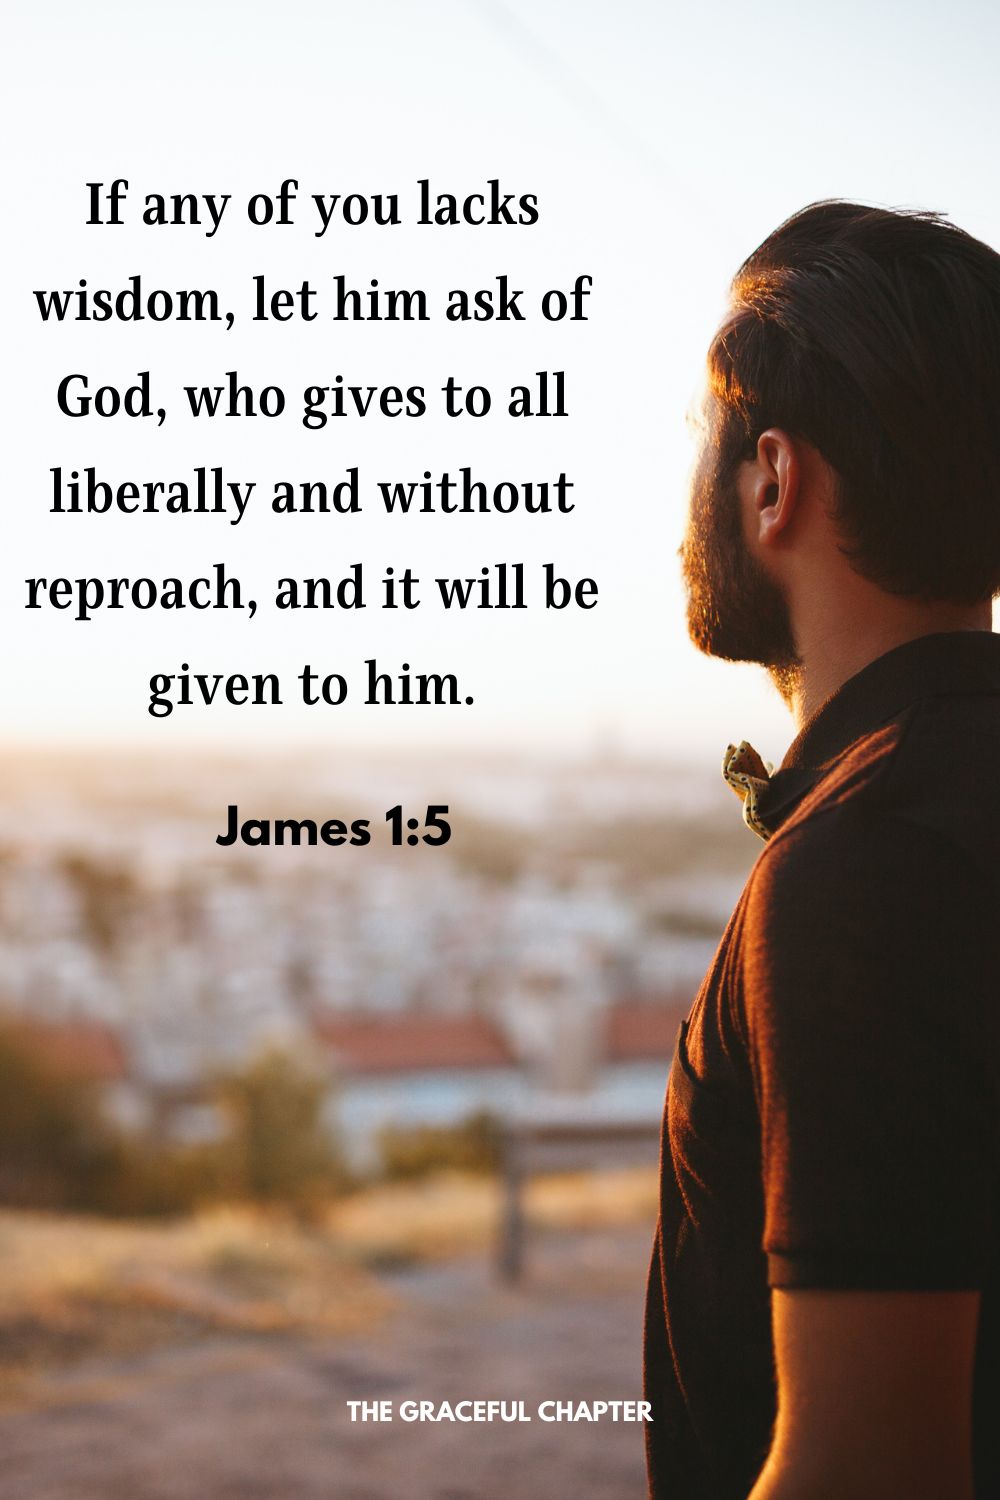 If any of you lacks wisdom, let him ask of God, who gives to all liberally and without reproach, and it will be given to him. James 1:5